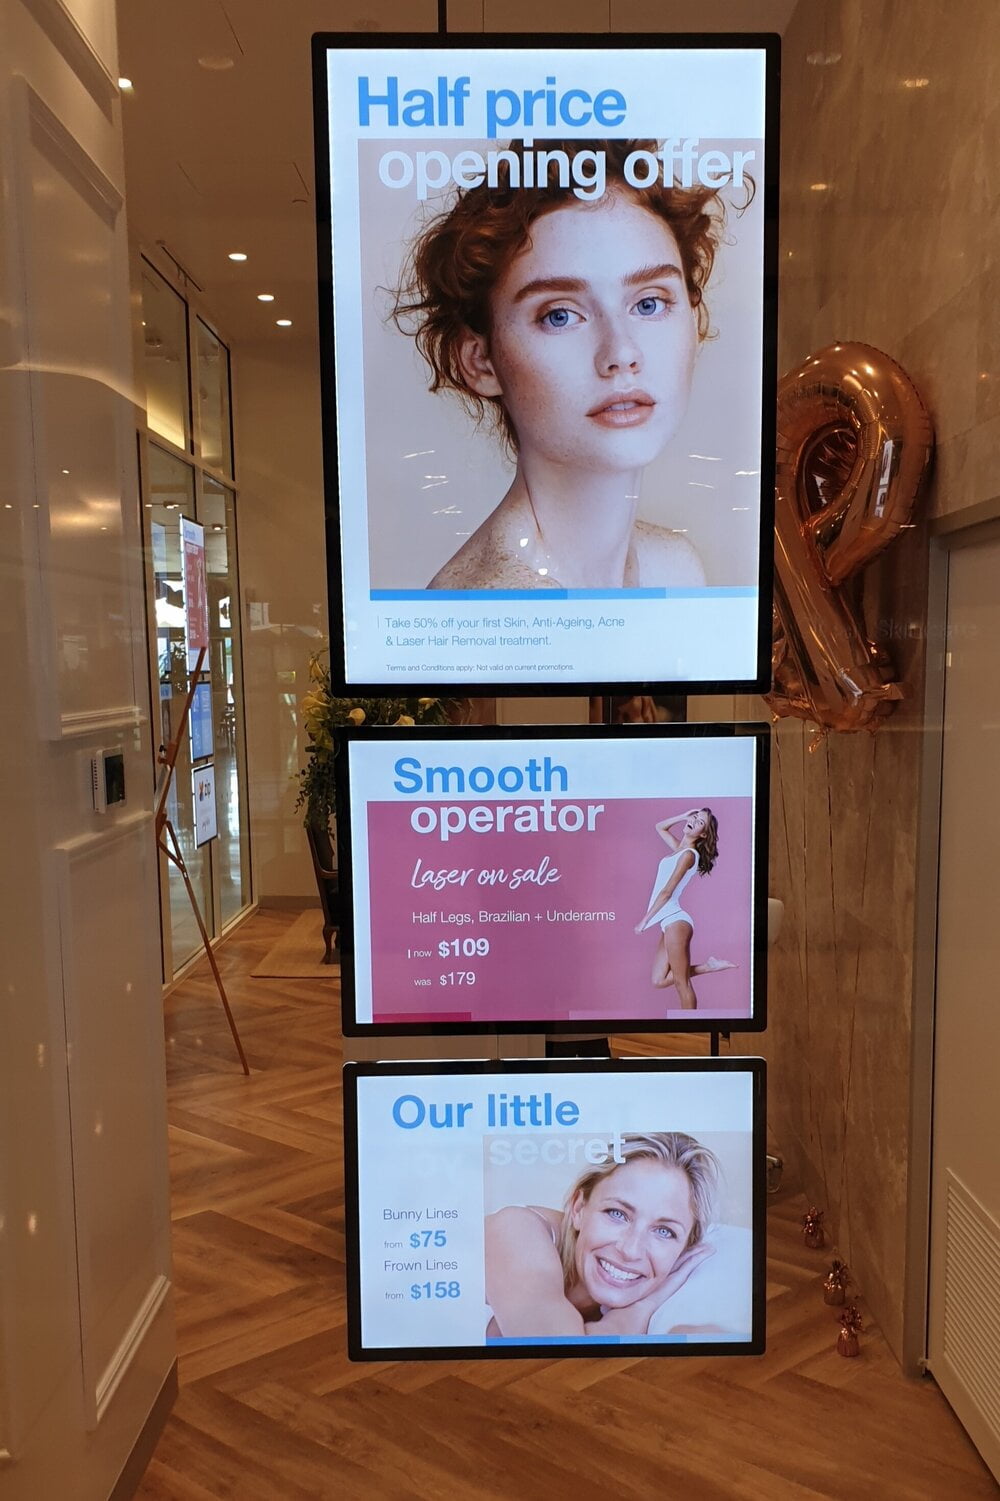 Clear Skincare - LED WINDOW DISPLAYS FOR REAL ESTATE RETIAL AND TRAVEL AGENCIES - VitrineMedia.com.au